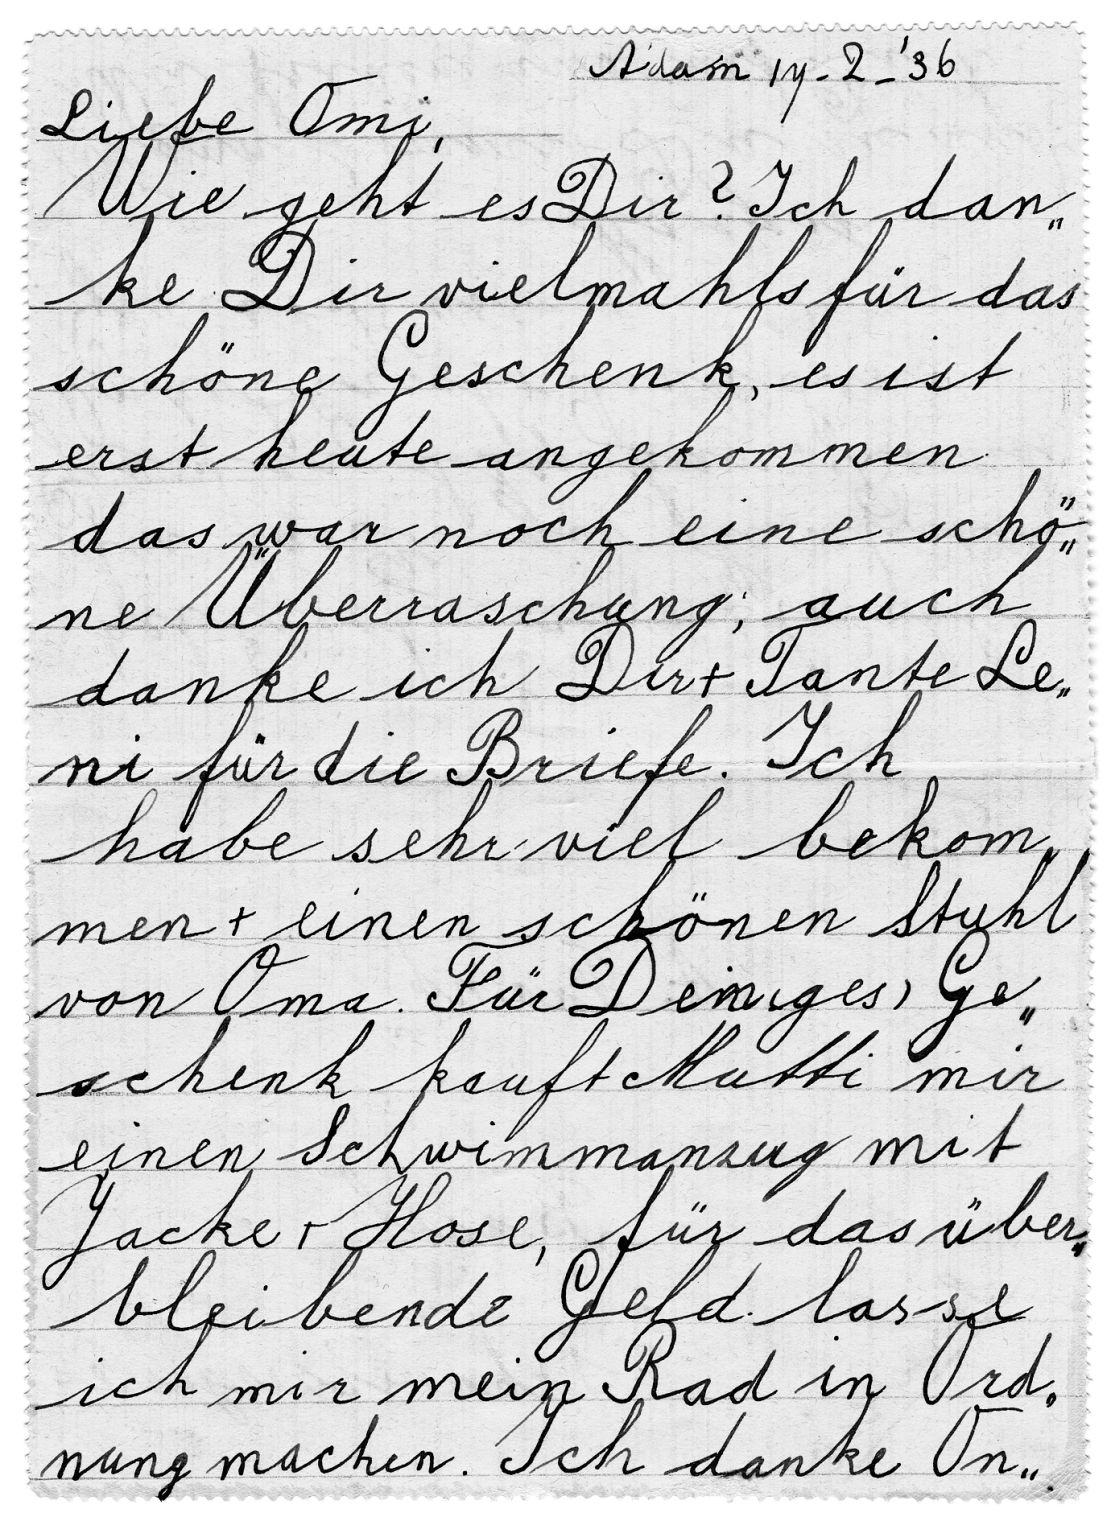 A letter Margot wrote to her grandmother, Alice, in 1936.